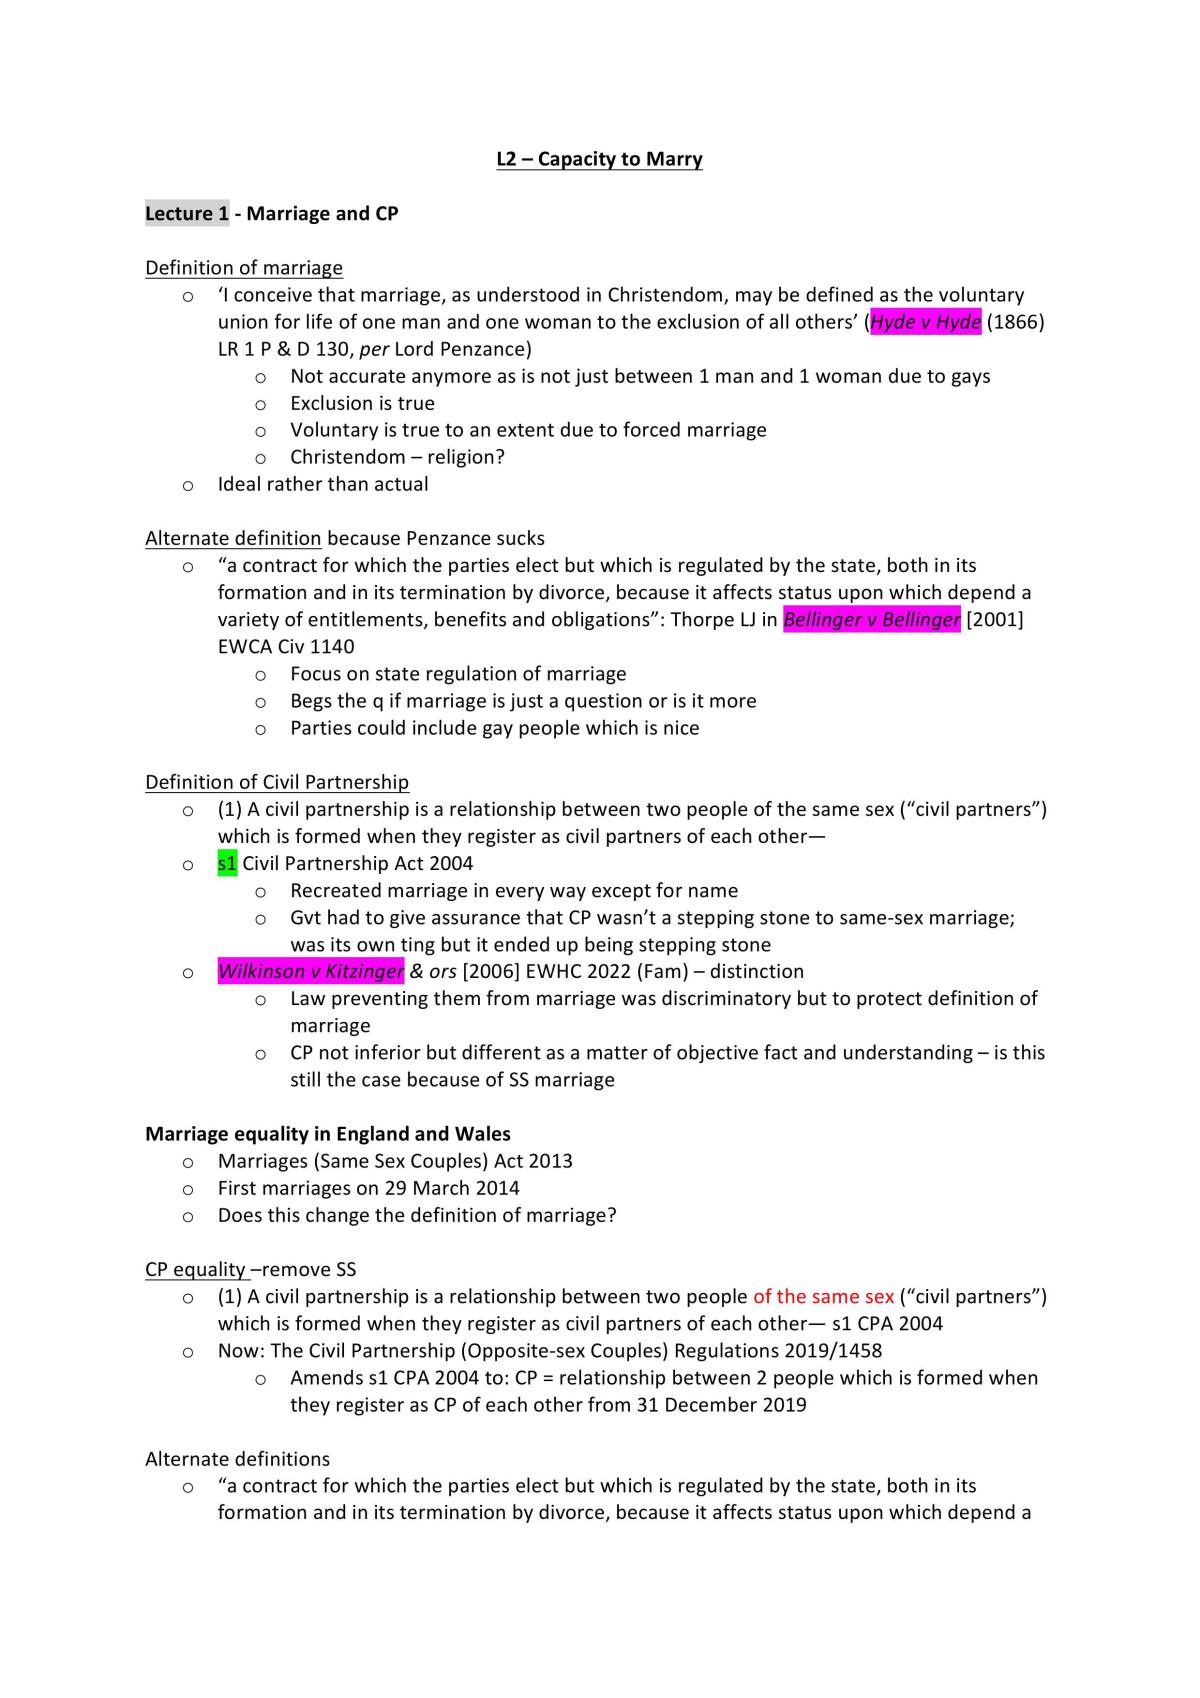 Family law notes - Page 1